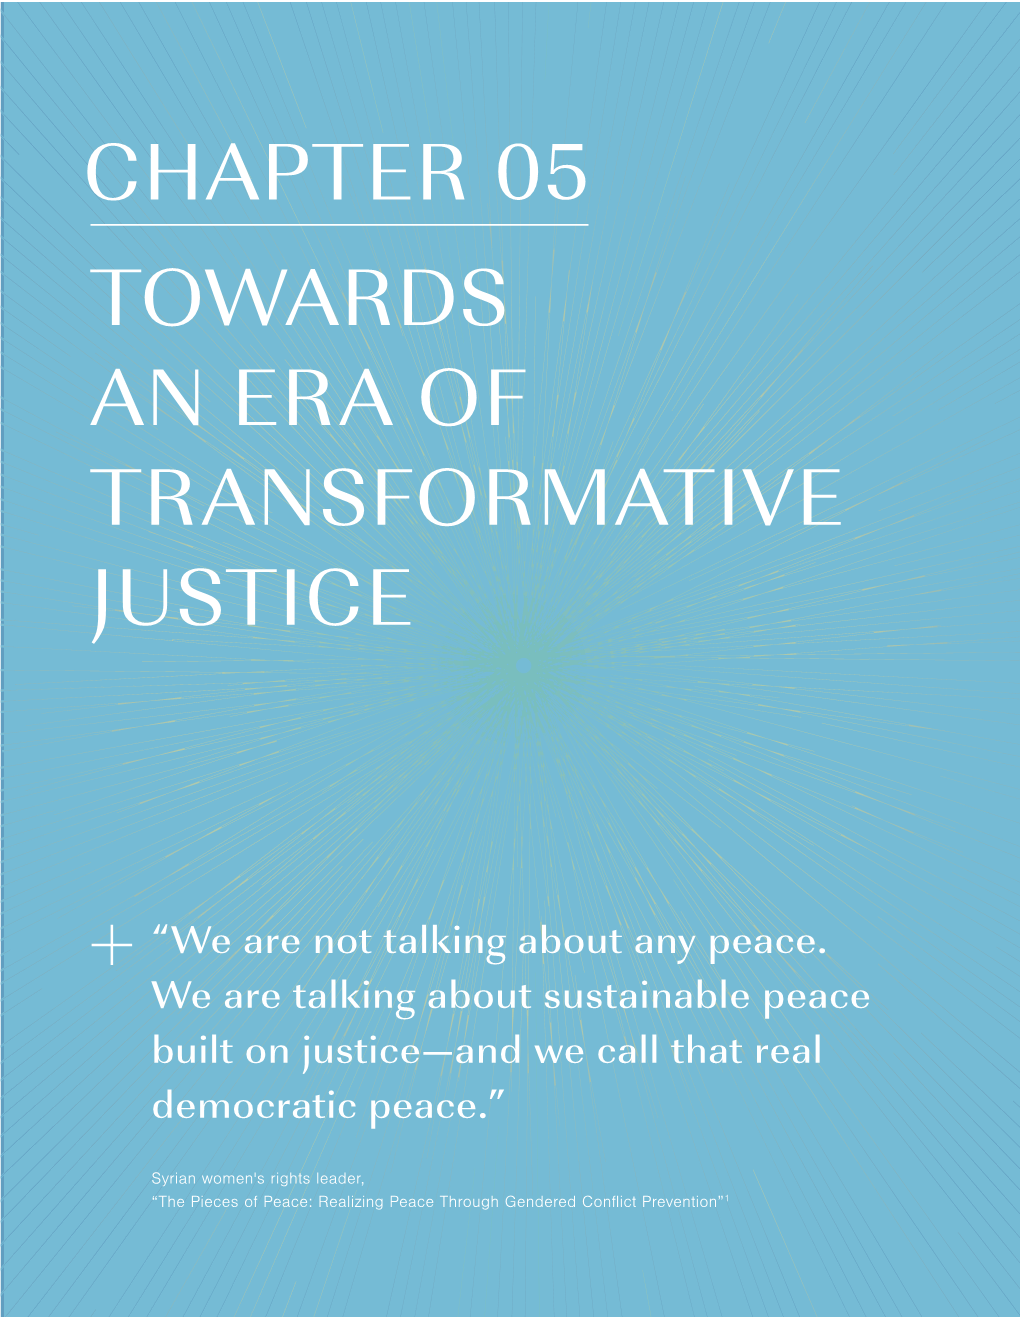 Chapter 05 Towards an Era of Transformative Justice